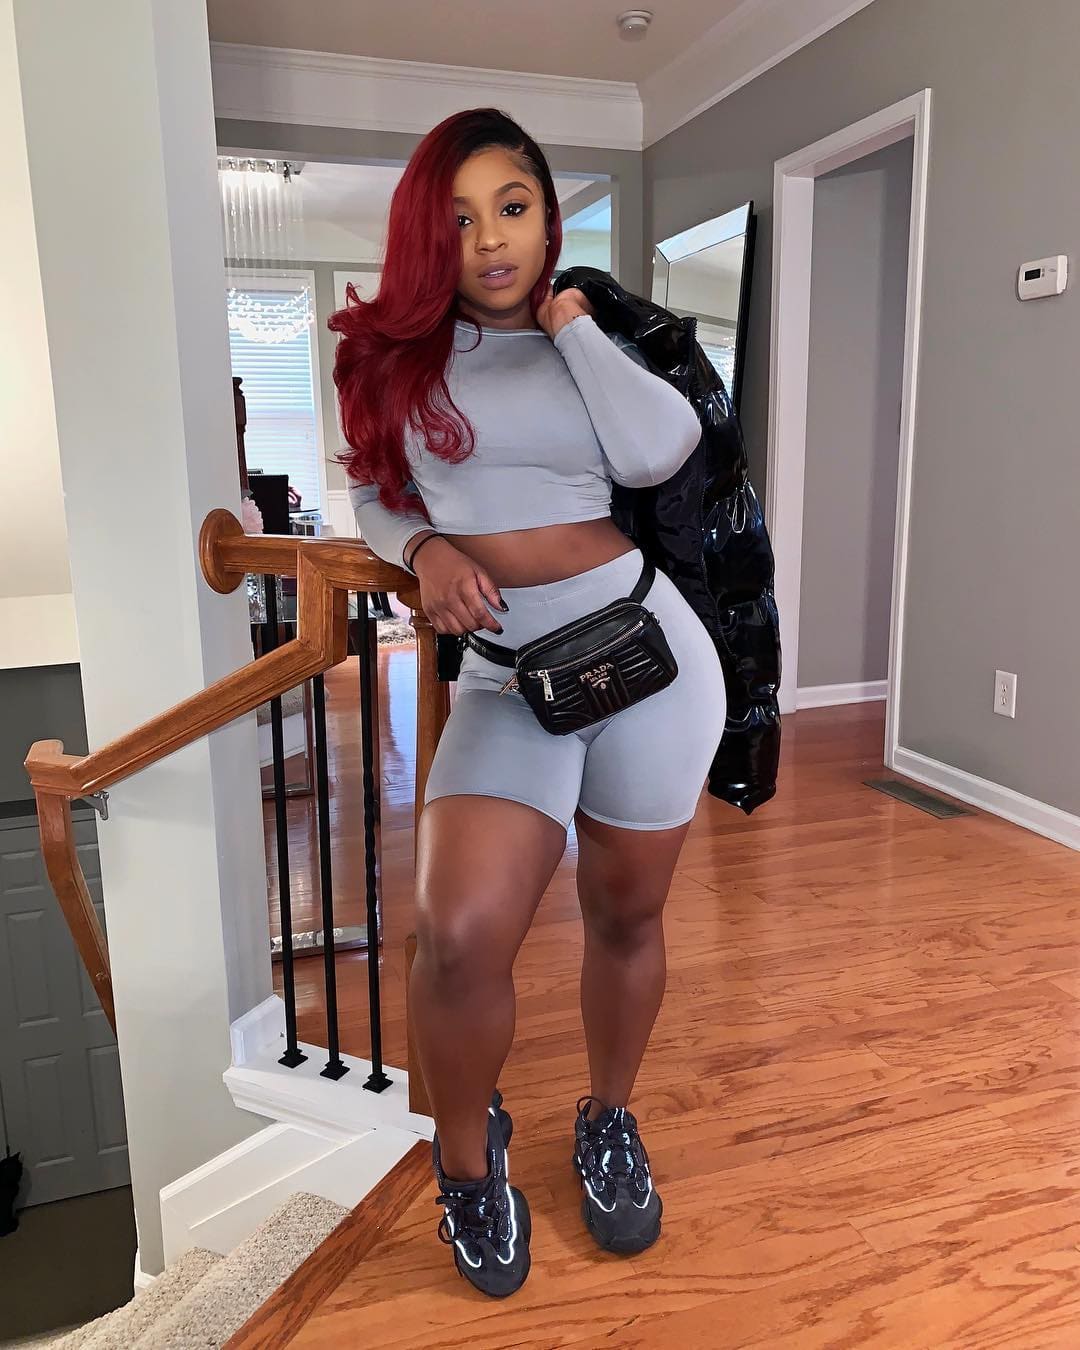 Reginae Carter Is On Slay Mode - Check Out Her Latest Outfit